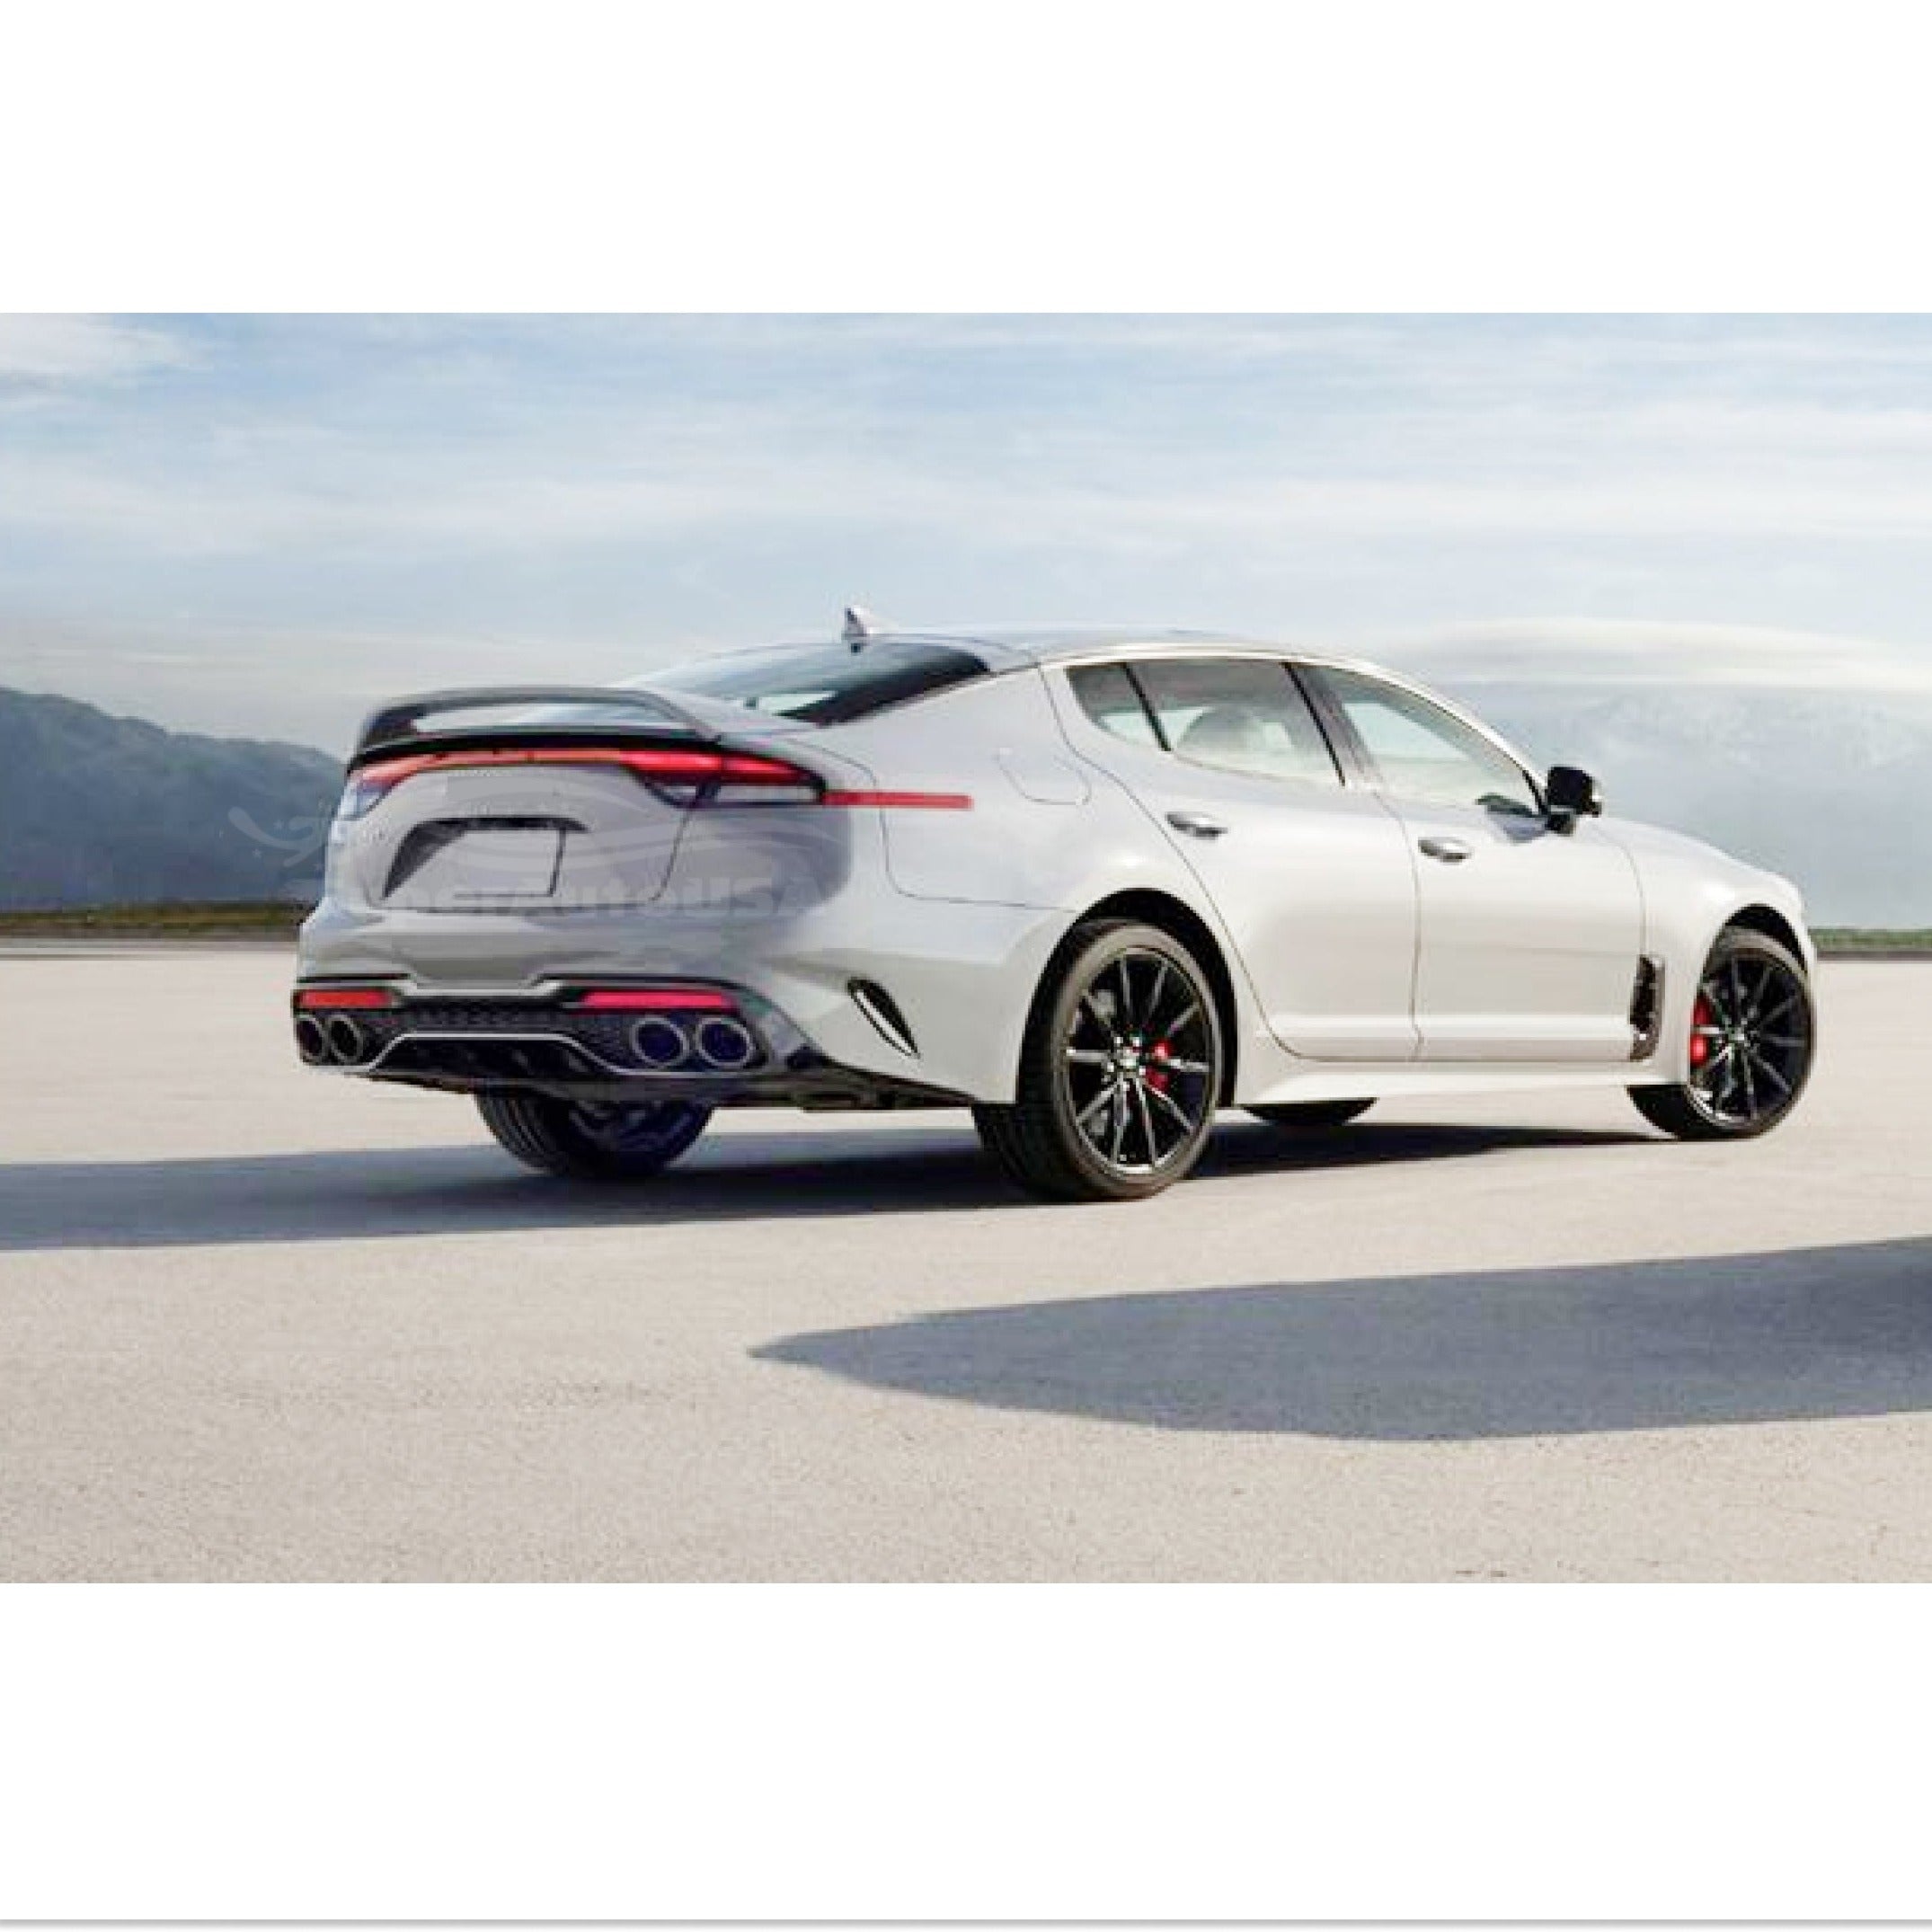 Side profile of the Fits Kia Stinger 2018-2023 featuring the Ceramic Silver Metallic Scorpion GT Style Rear Spoiler, adding a dynamic and sporty touch